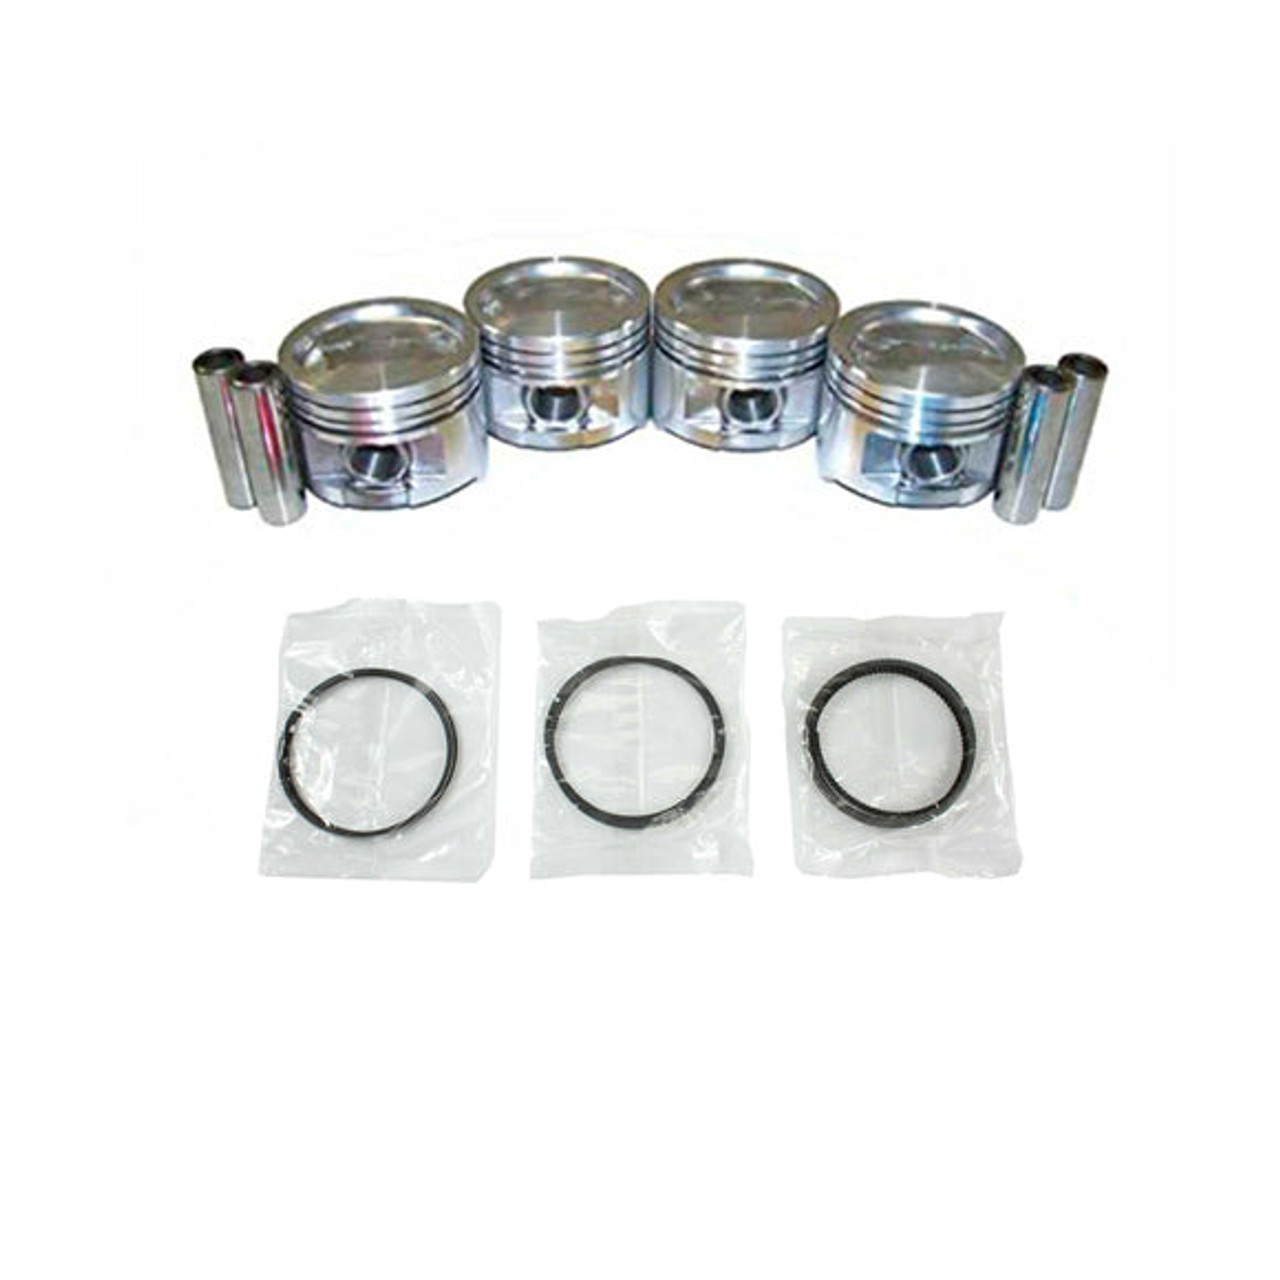 Piston Set with Rings - 1993 Ford Escort 1.9L Engine Parts # PRK4125ZE3